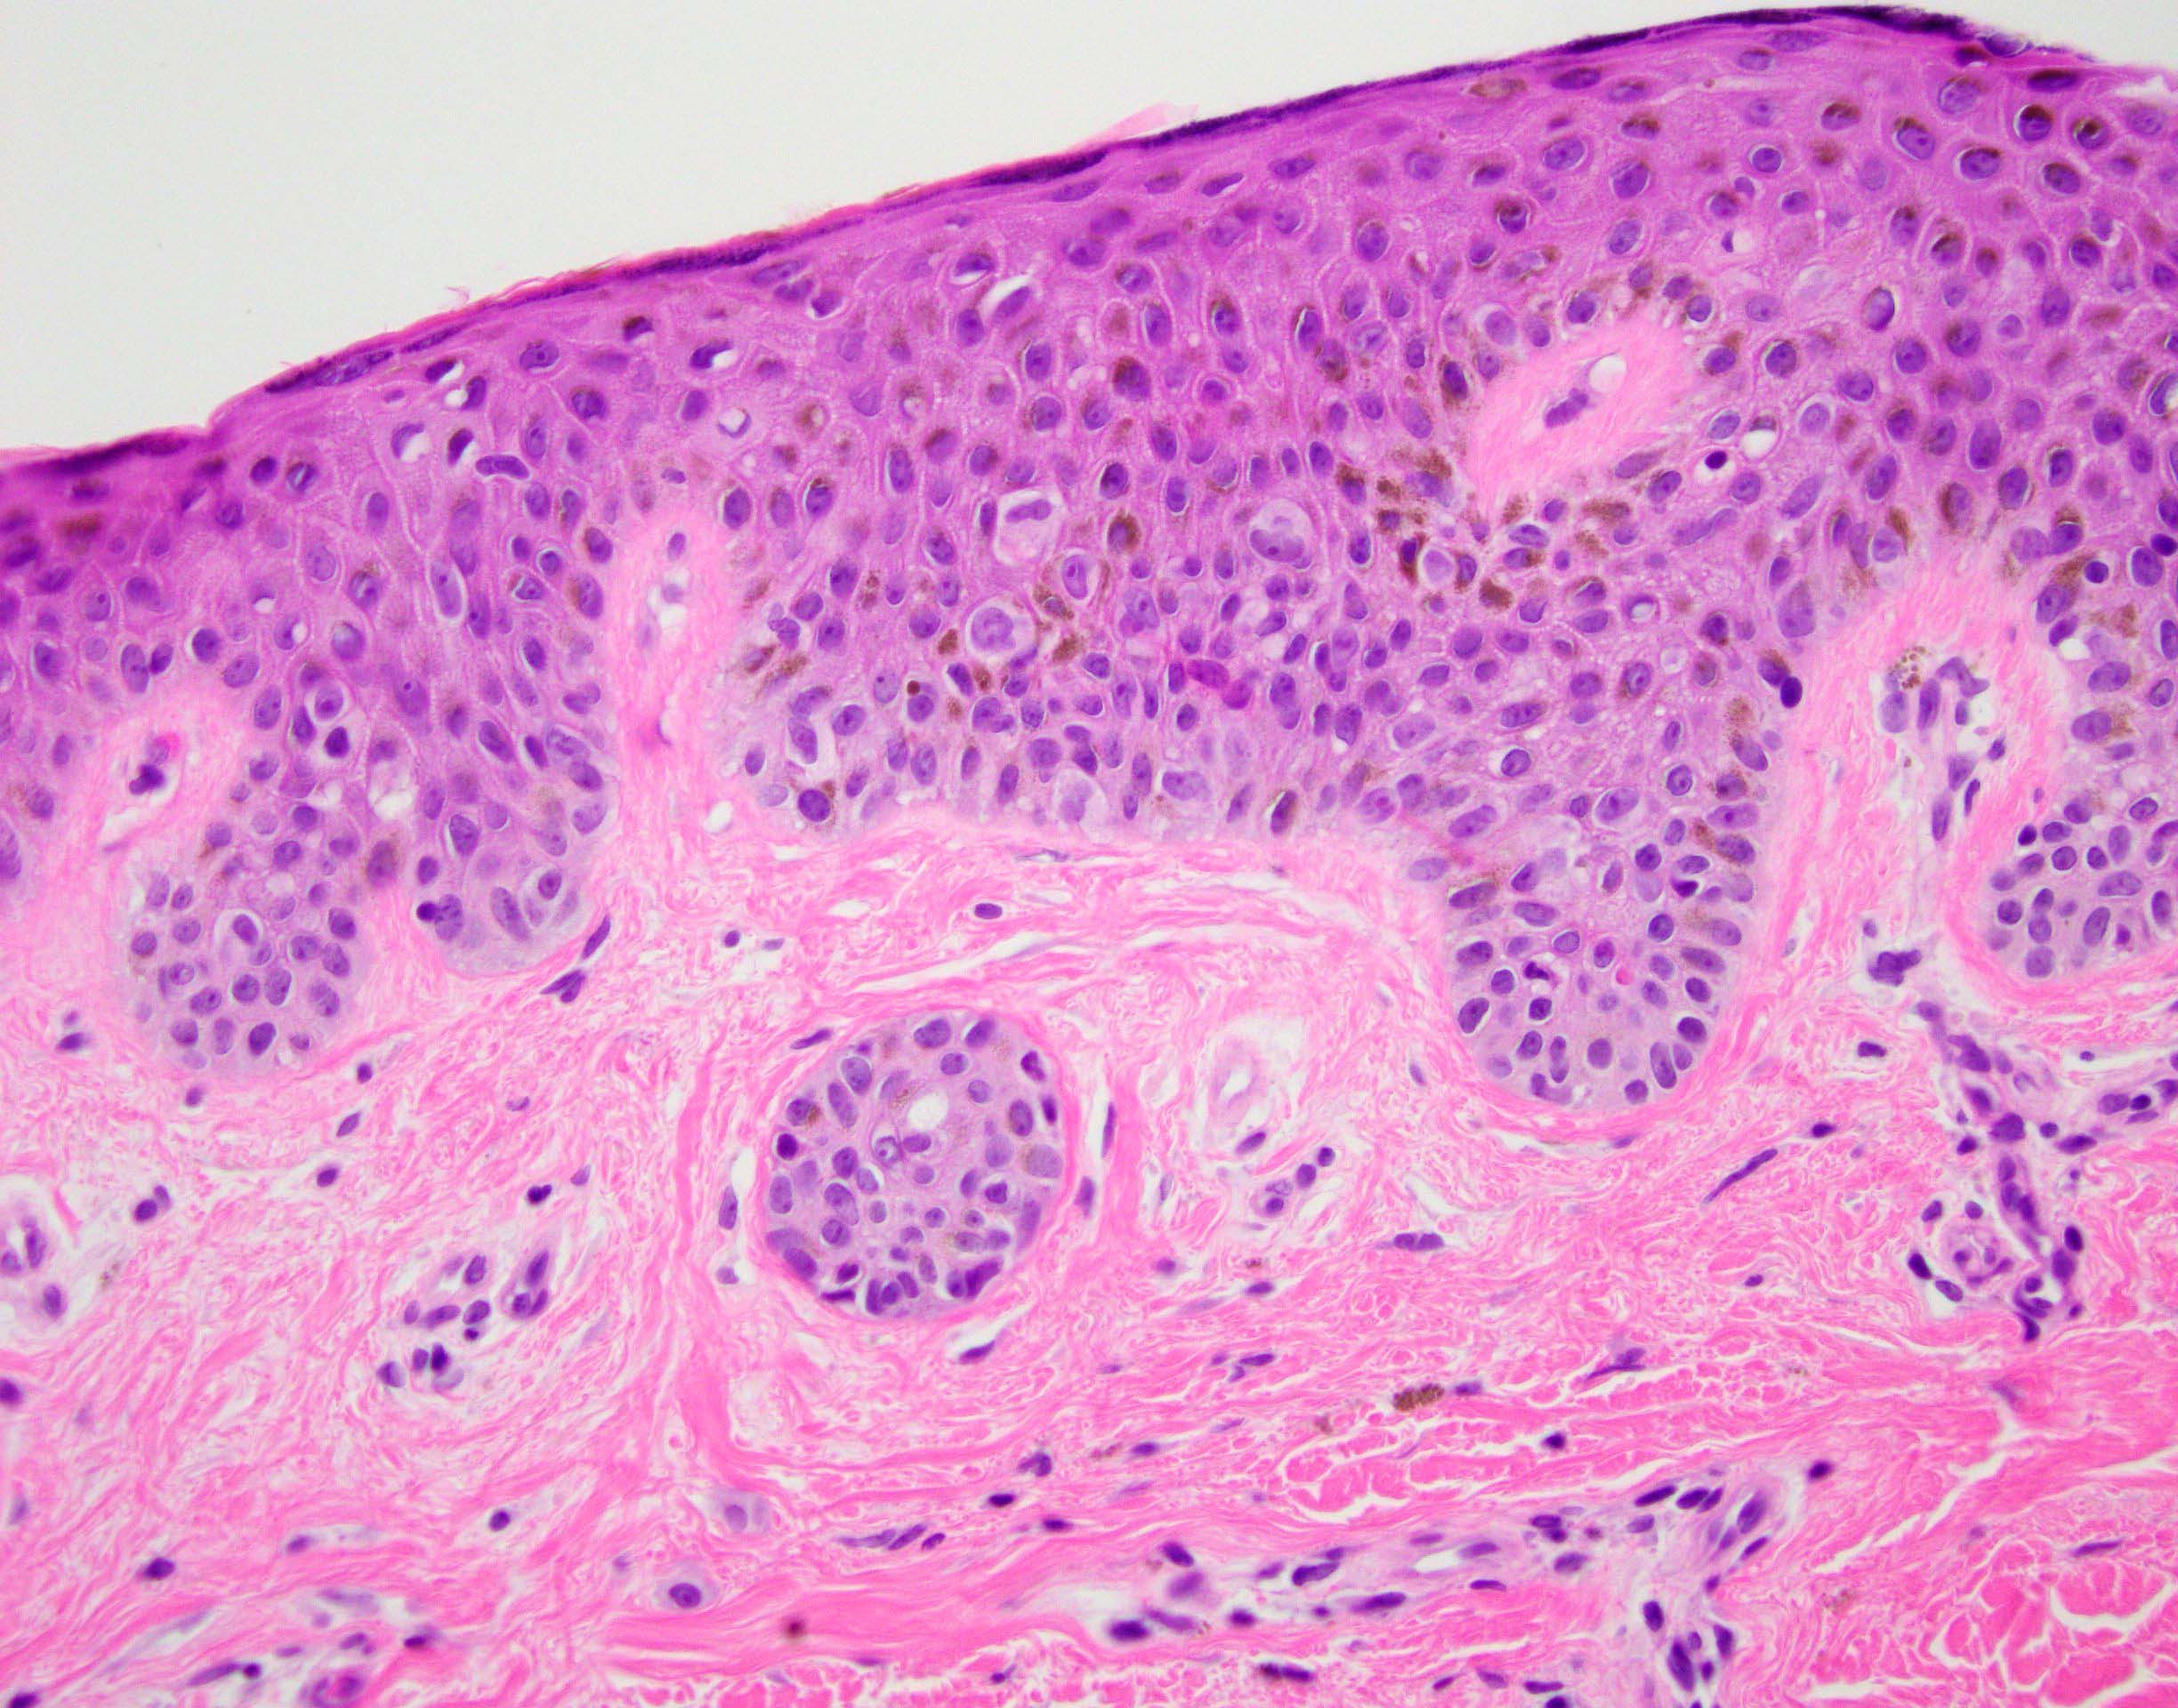 Dysplastic compound nevus with focally severe atypia